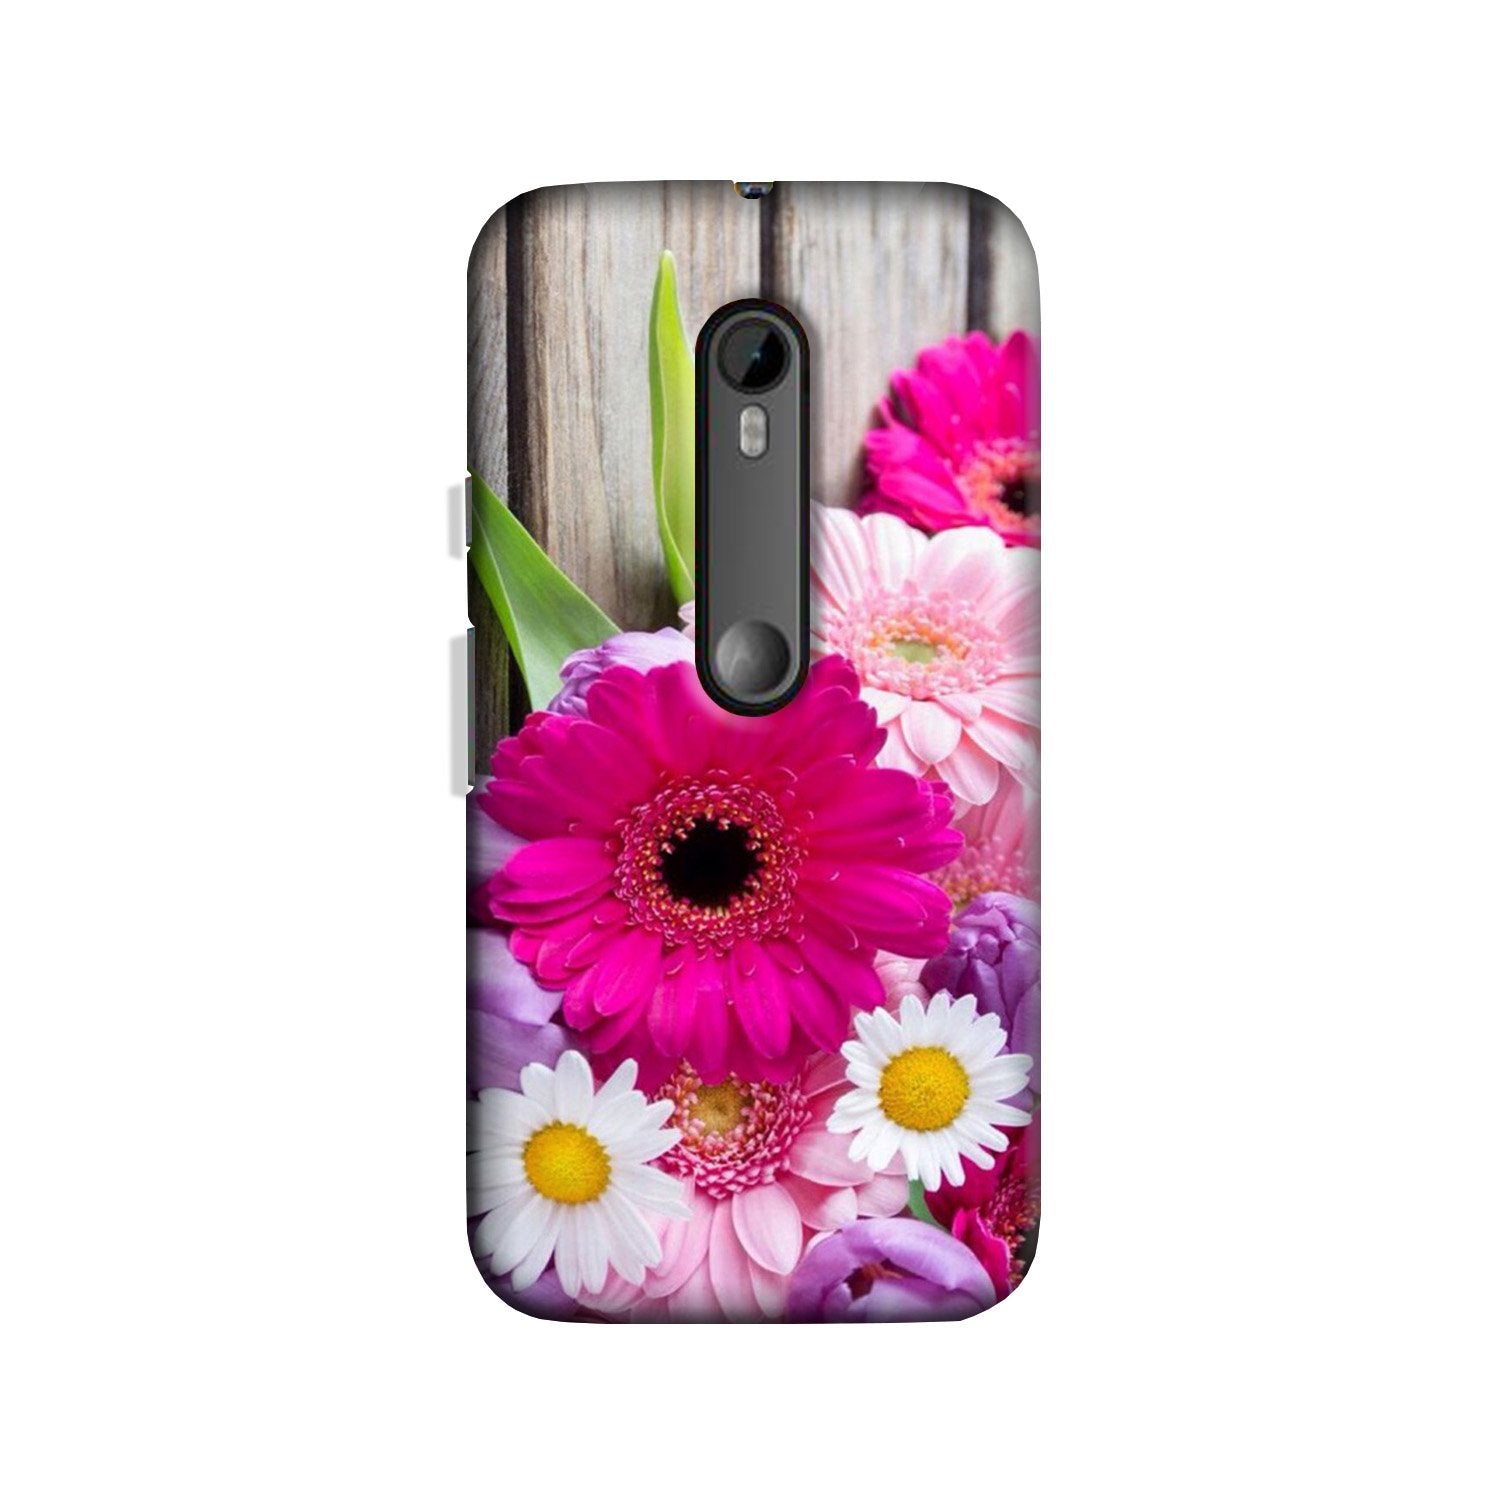 Coloful Daisy2 Case for Moto X Play